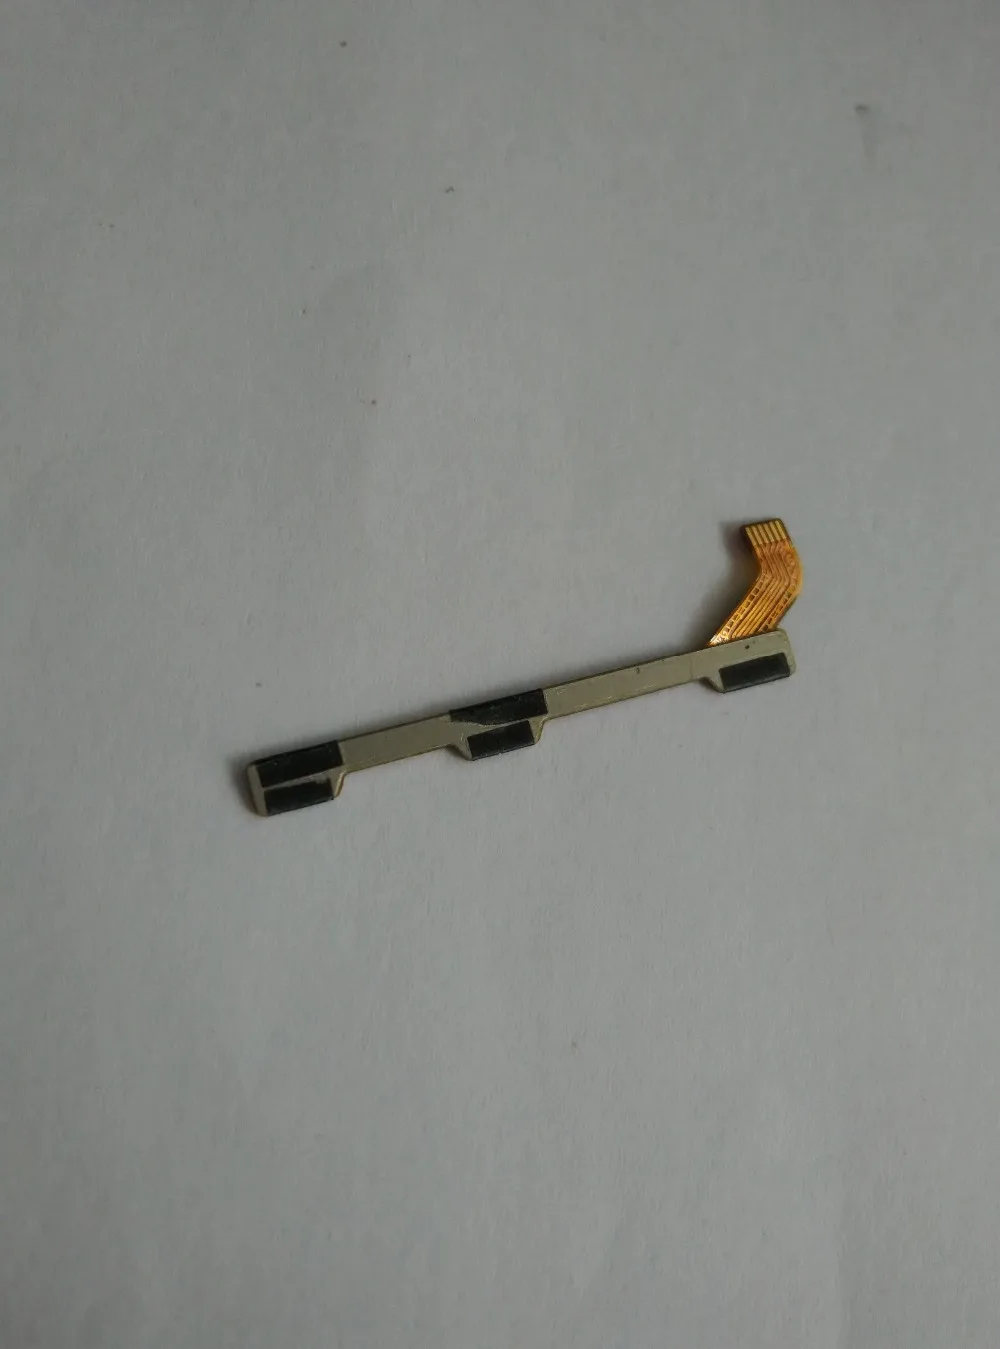 

Used+100% Umi Super power on/off + volume FPC Key up/down button flex cable FPC For Umi Super Free Shipping+tracking